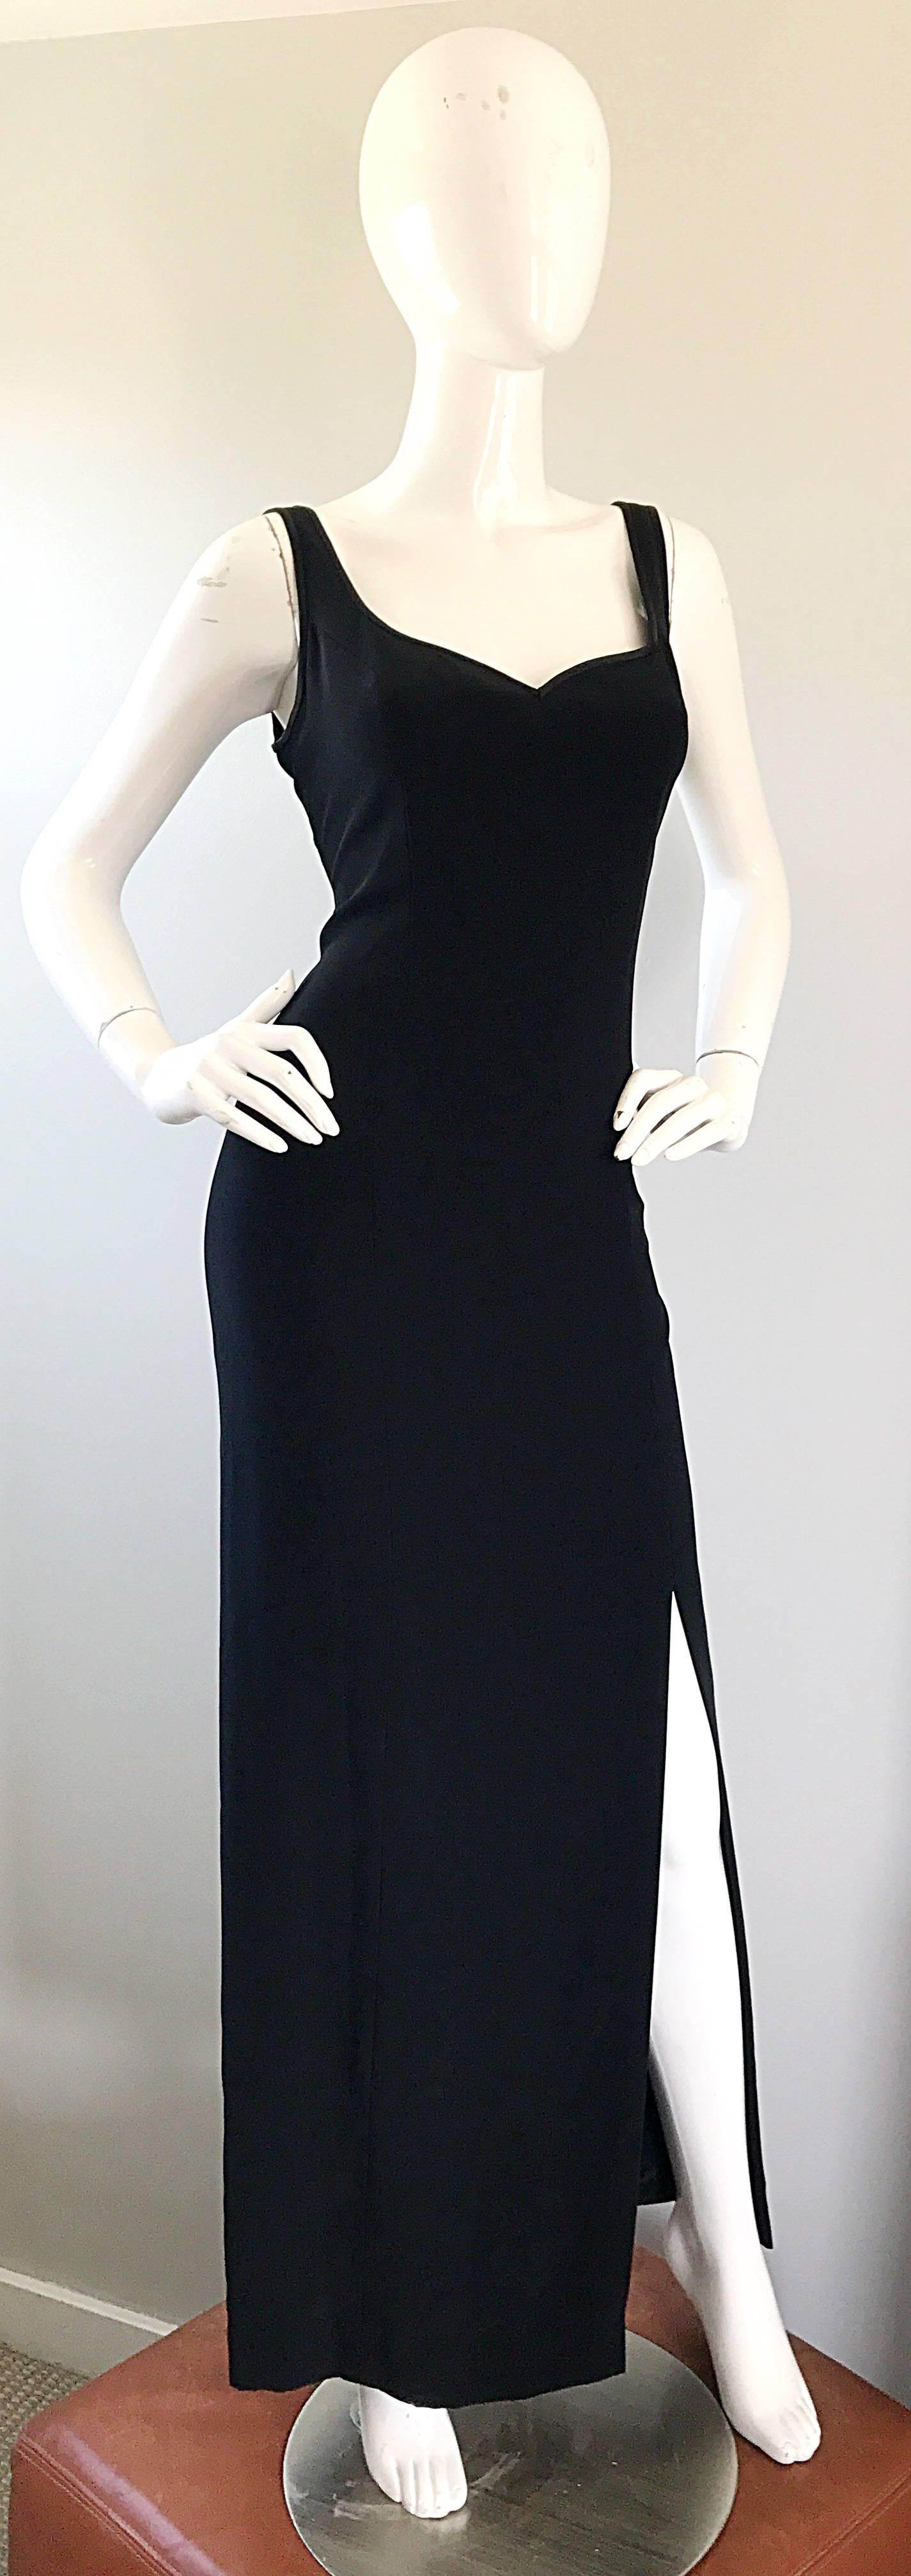 Women's 1990s Bob Mackie Size 10 Black Crepe Sexy 90s Vintage High Slit Evening Gown  For Sale